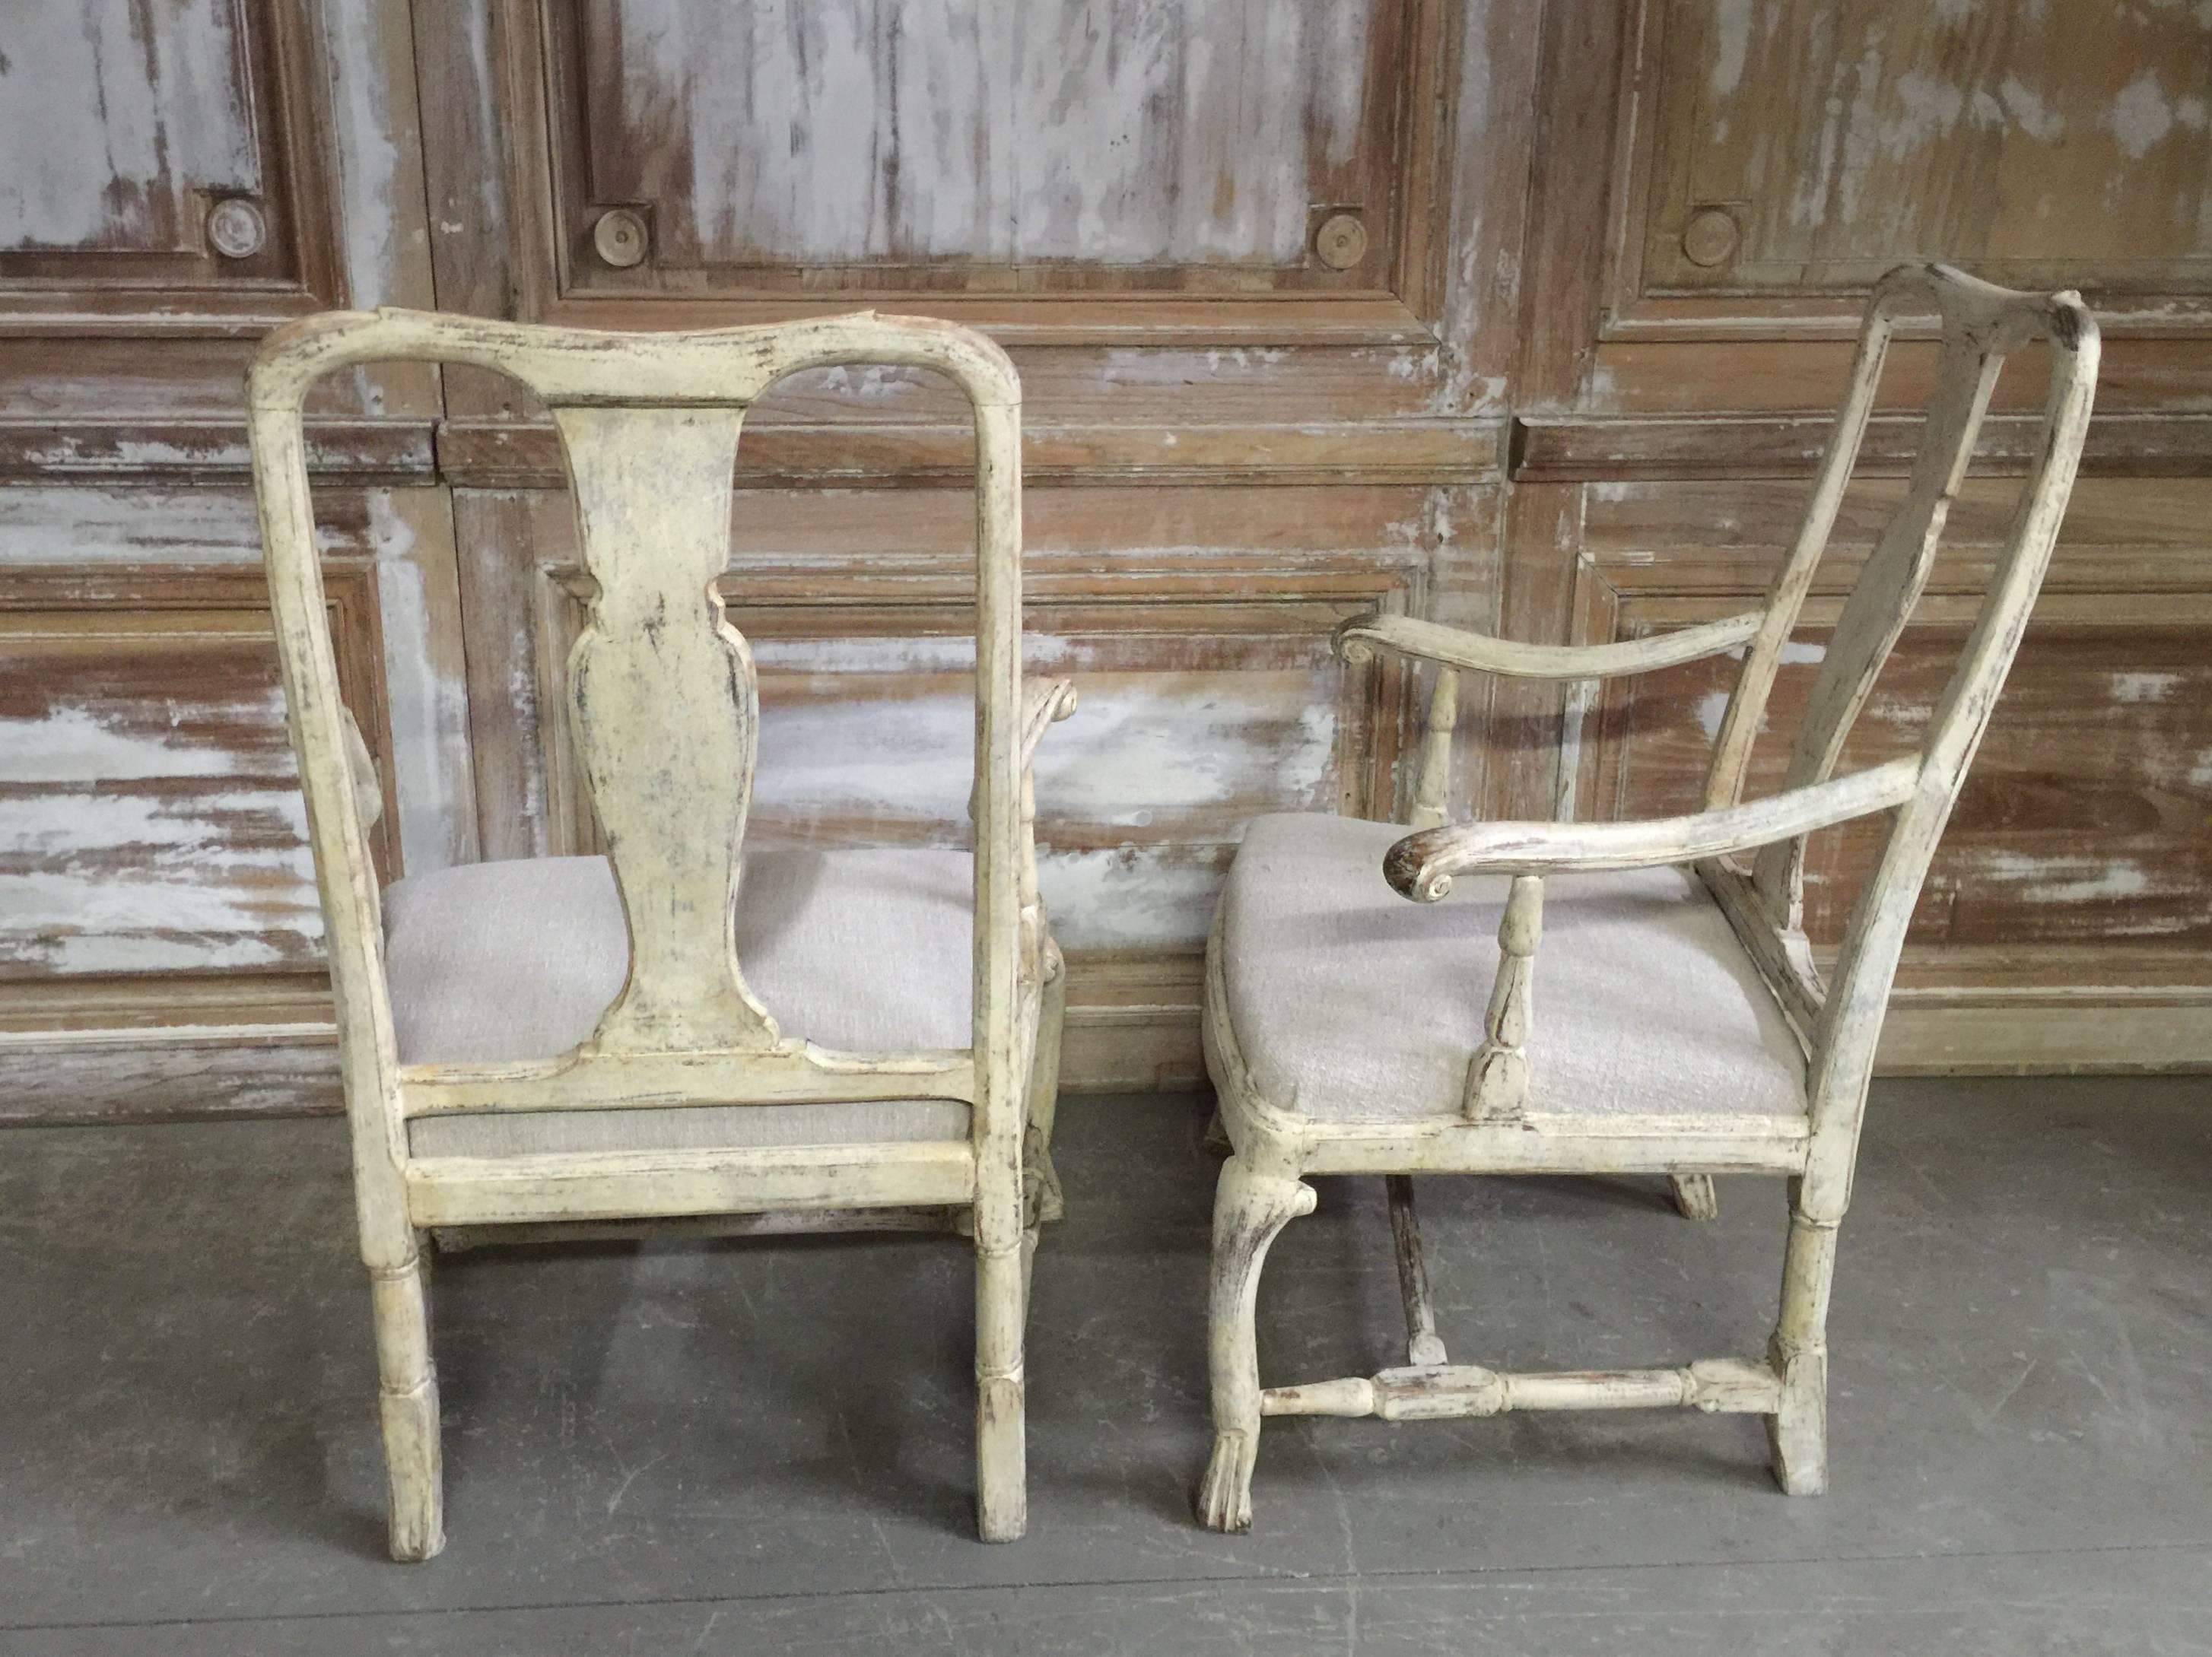 Pair of 18th century Swedish chairs, in Rococo period, circa 1760 with rocaille carving on the seat rails and pierced splats. Hand scraped back to traces of their original worn creamy white paint.
Seats covered with heavy hand loom antique